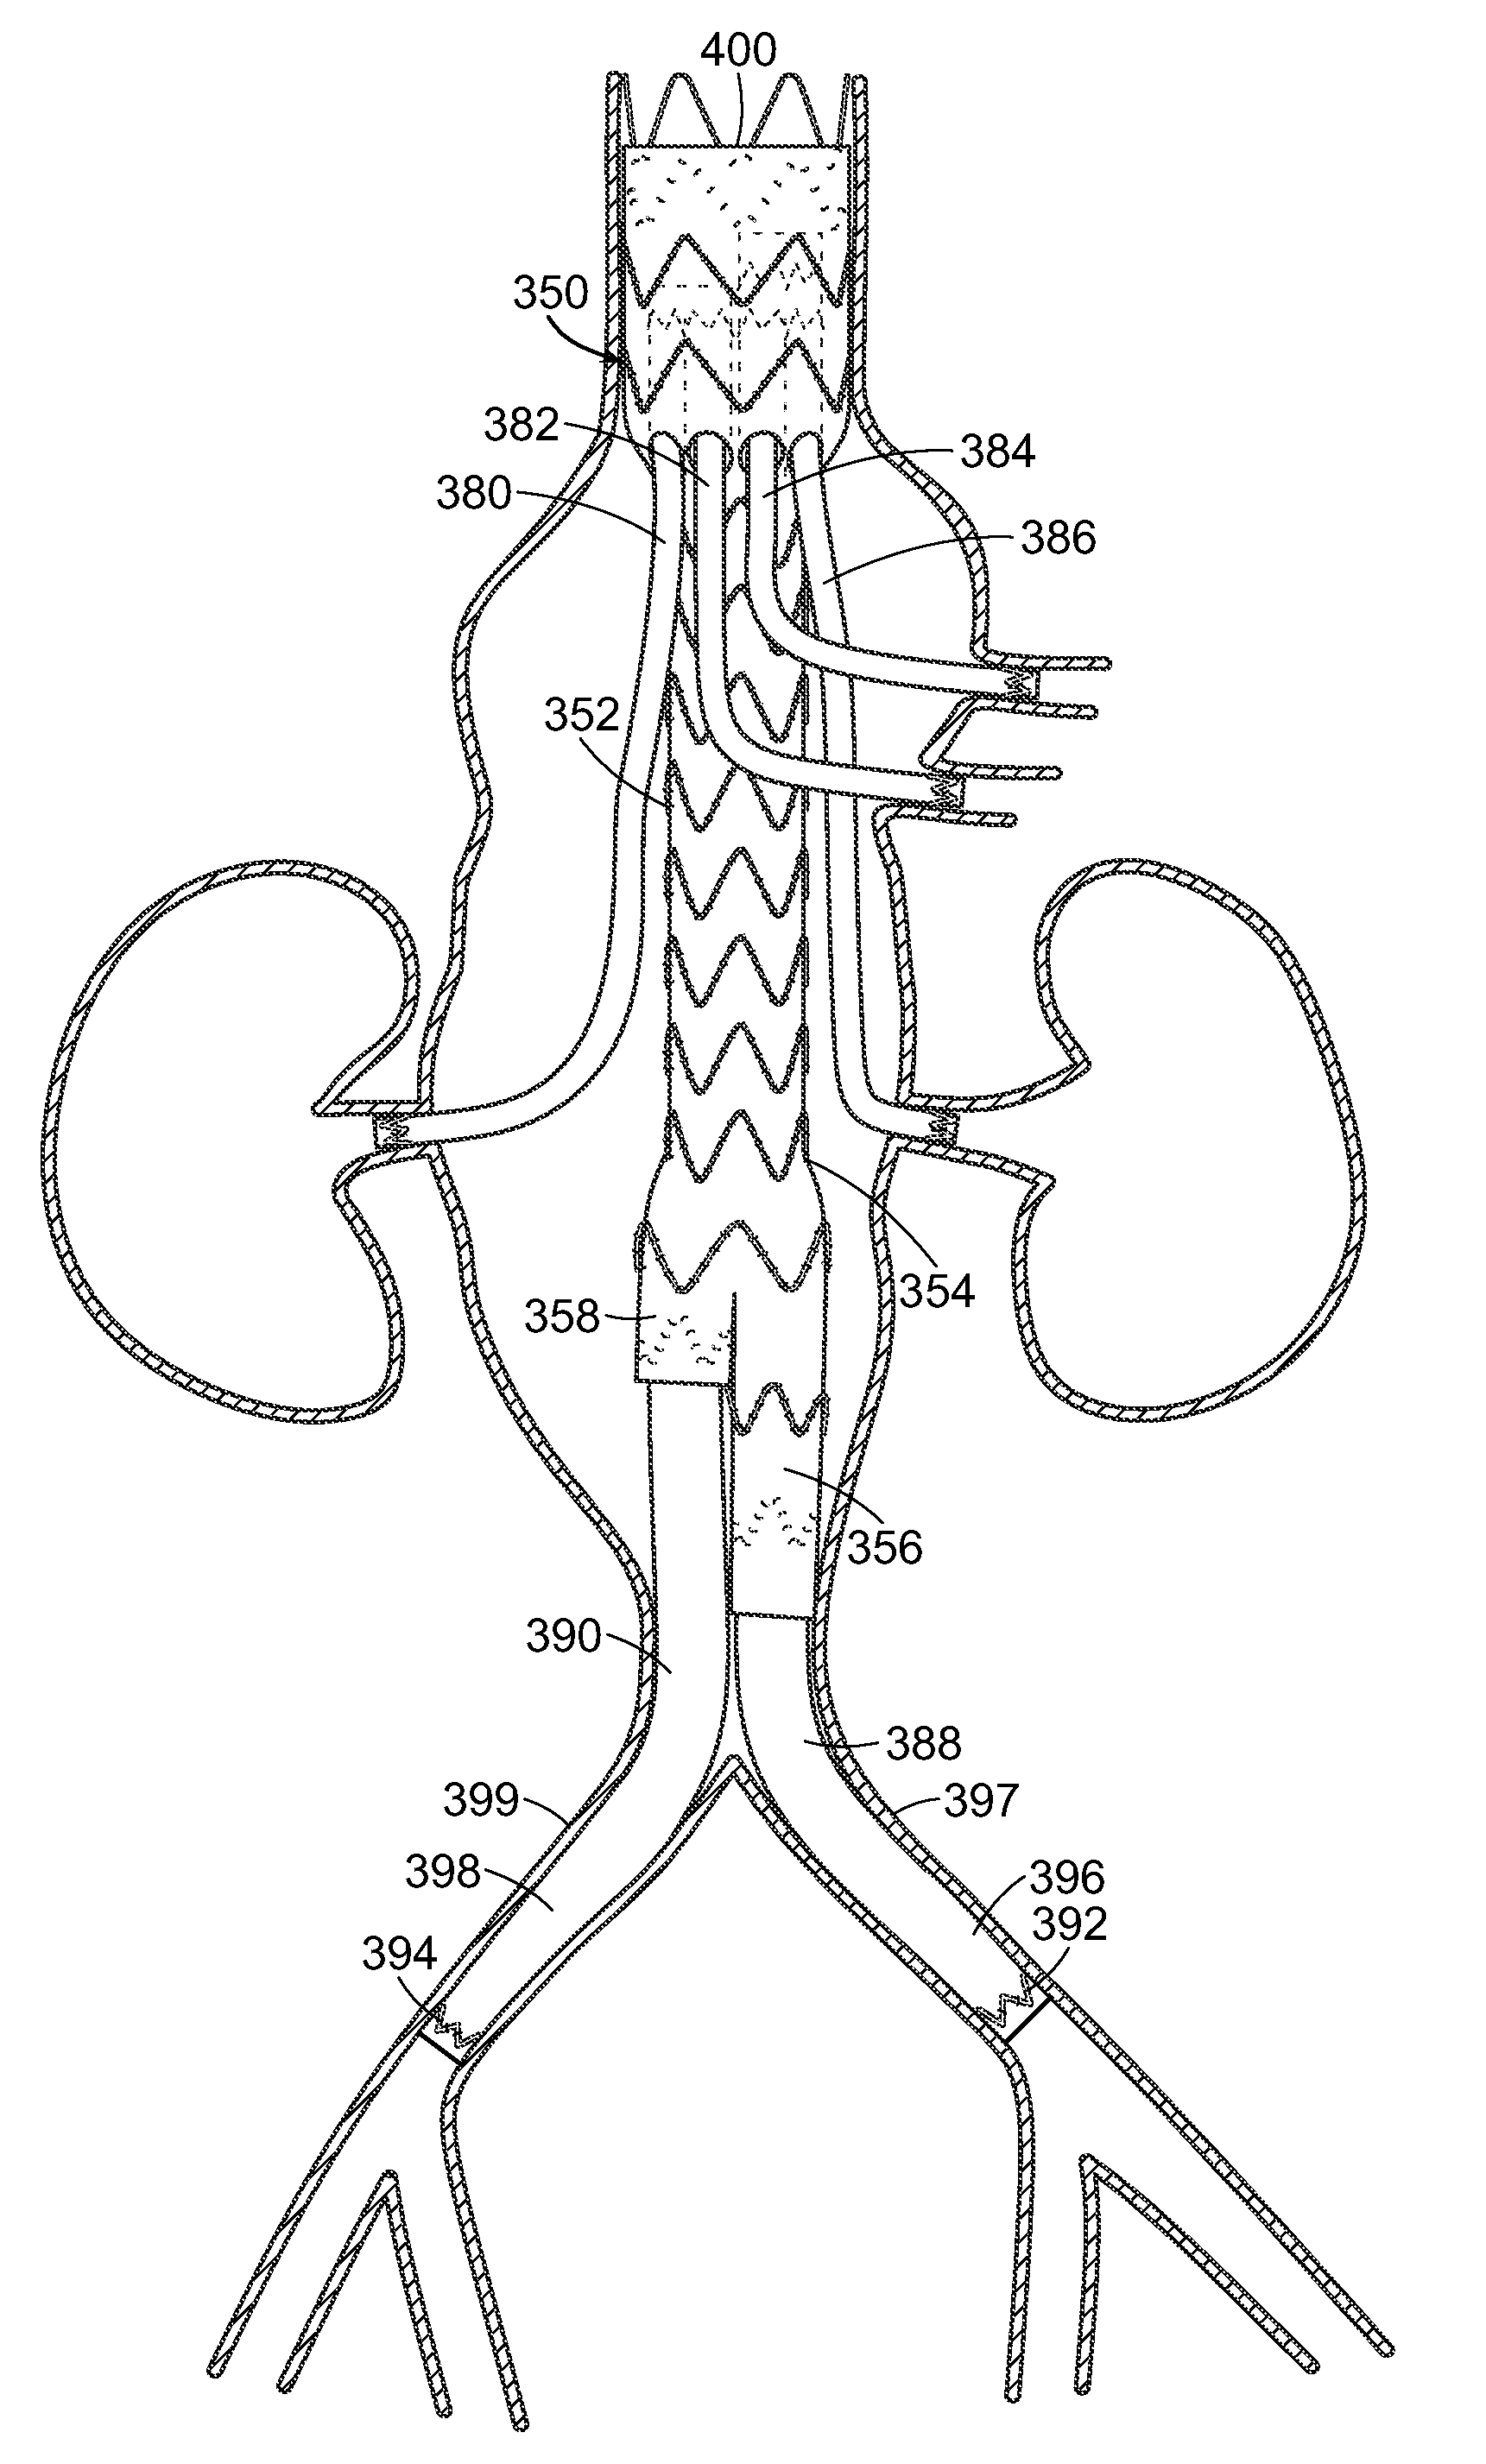 Vascular repair devices and methods of use